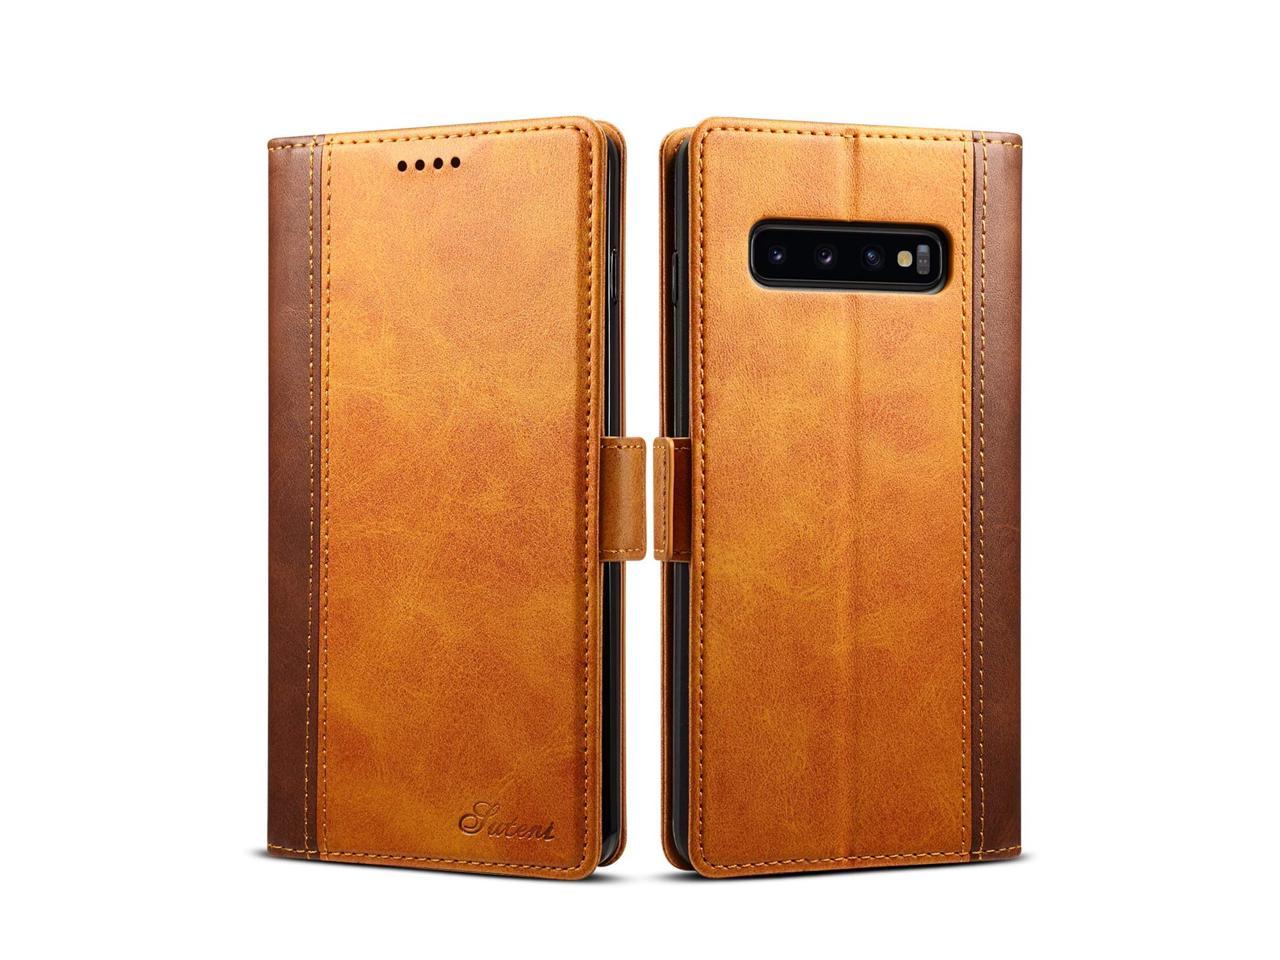 Cover for Leather Kickstand Extra-Protective Business Card Holders Cell Phone Cover Flip Cover Samsung Galaxy S10 Plus Flip Case 